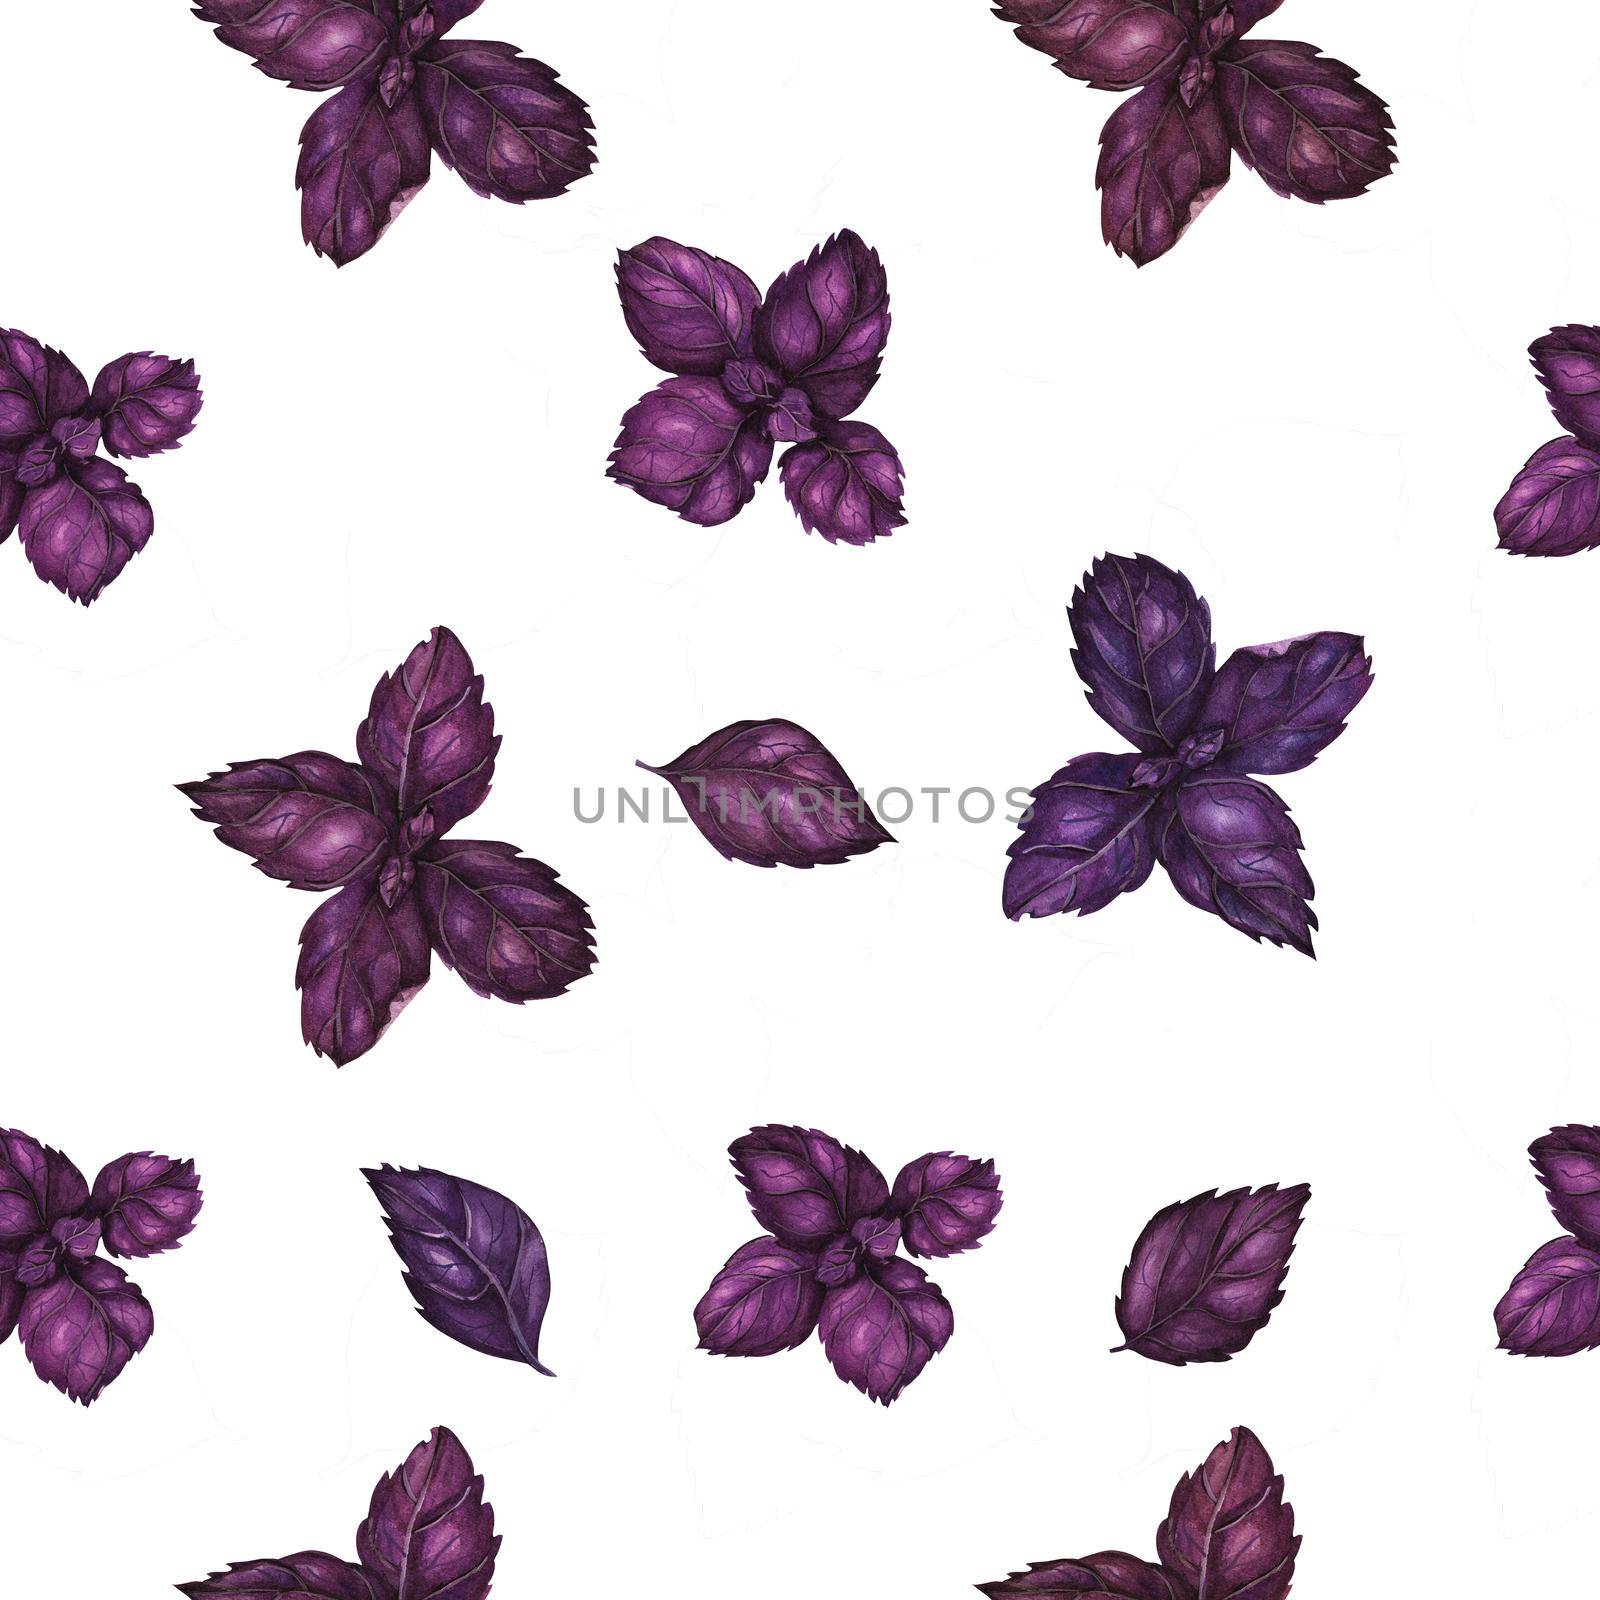 Vegan watercolor seamless pattern with purple basil branches. White background, isolated, clipping path included